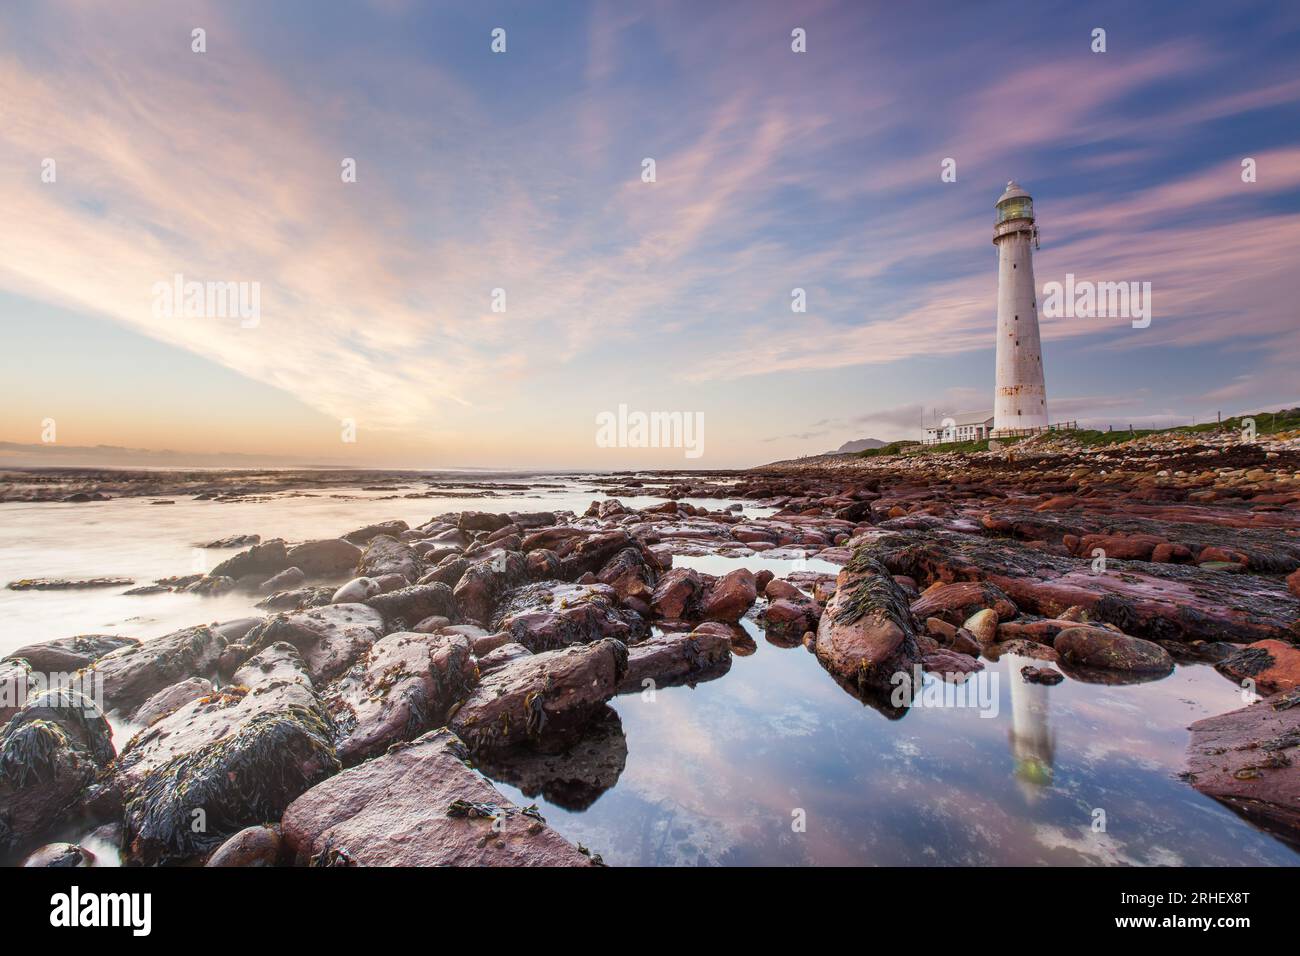 Ocean landscape photograph of the Atlantic ocean Slangkop lighthouse in Kommetjie, South Africa with pink sunset clouds for travelling tourism Stock Photo